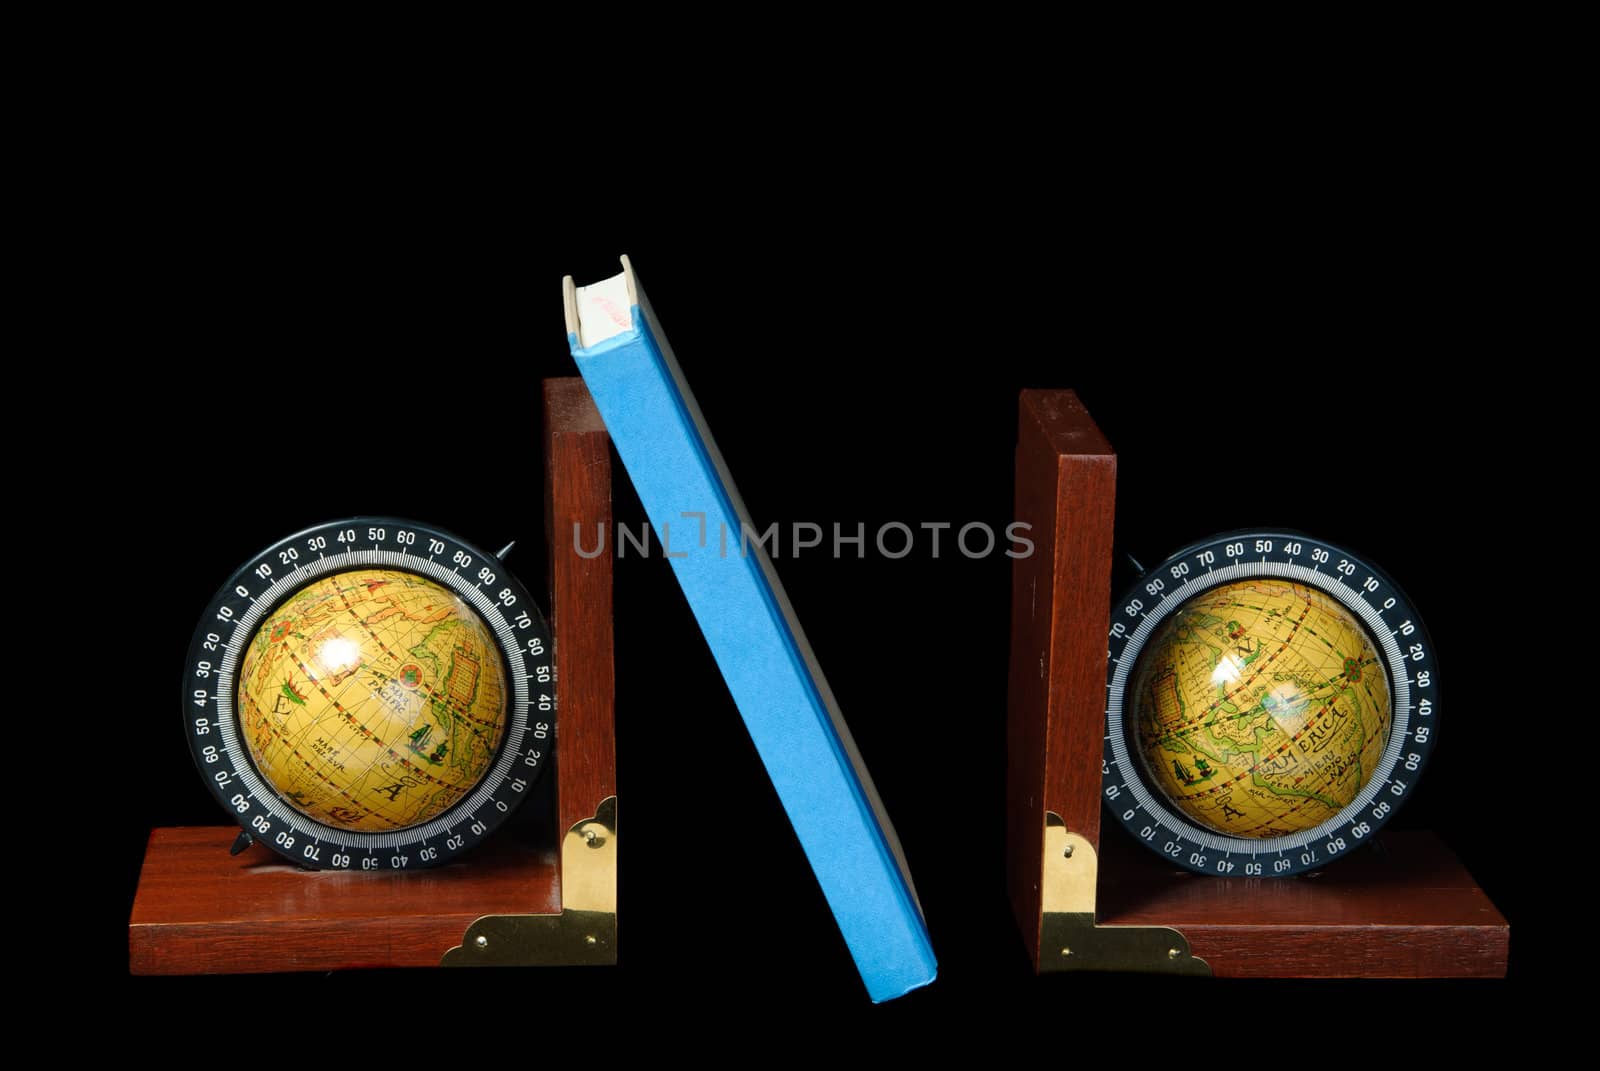 Two world globe bookends holding up a book, isolated against a black background